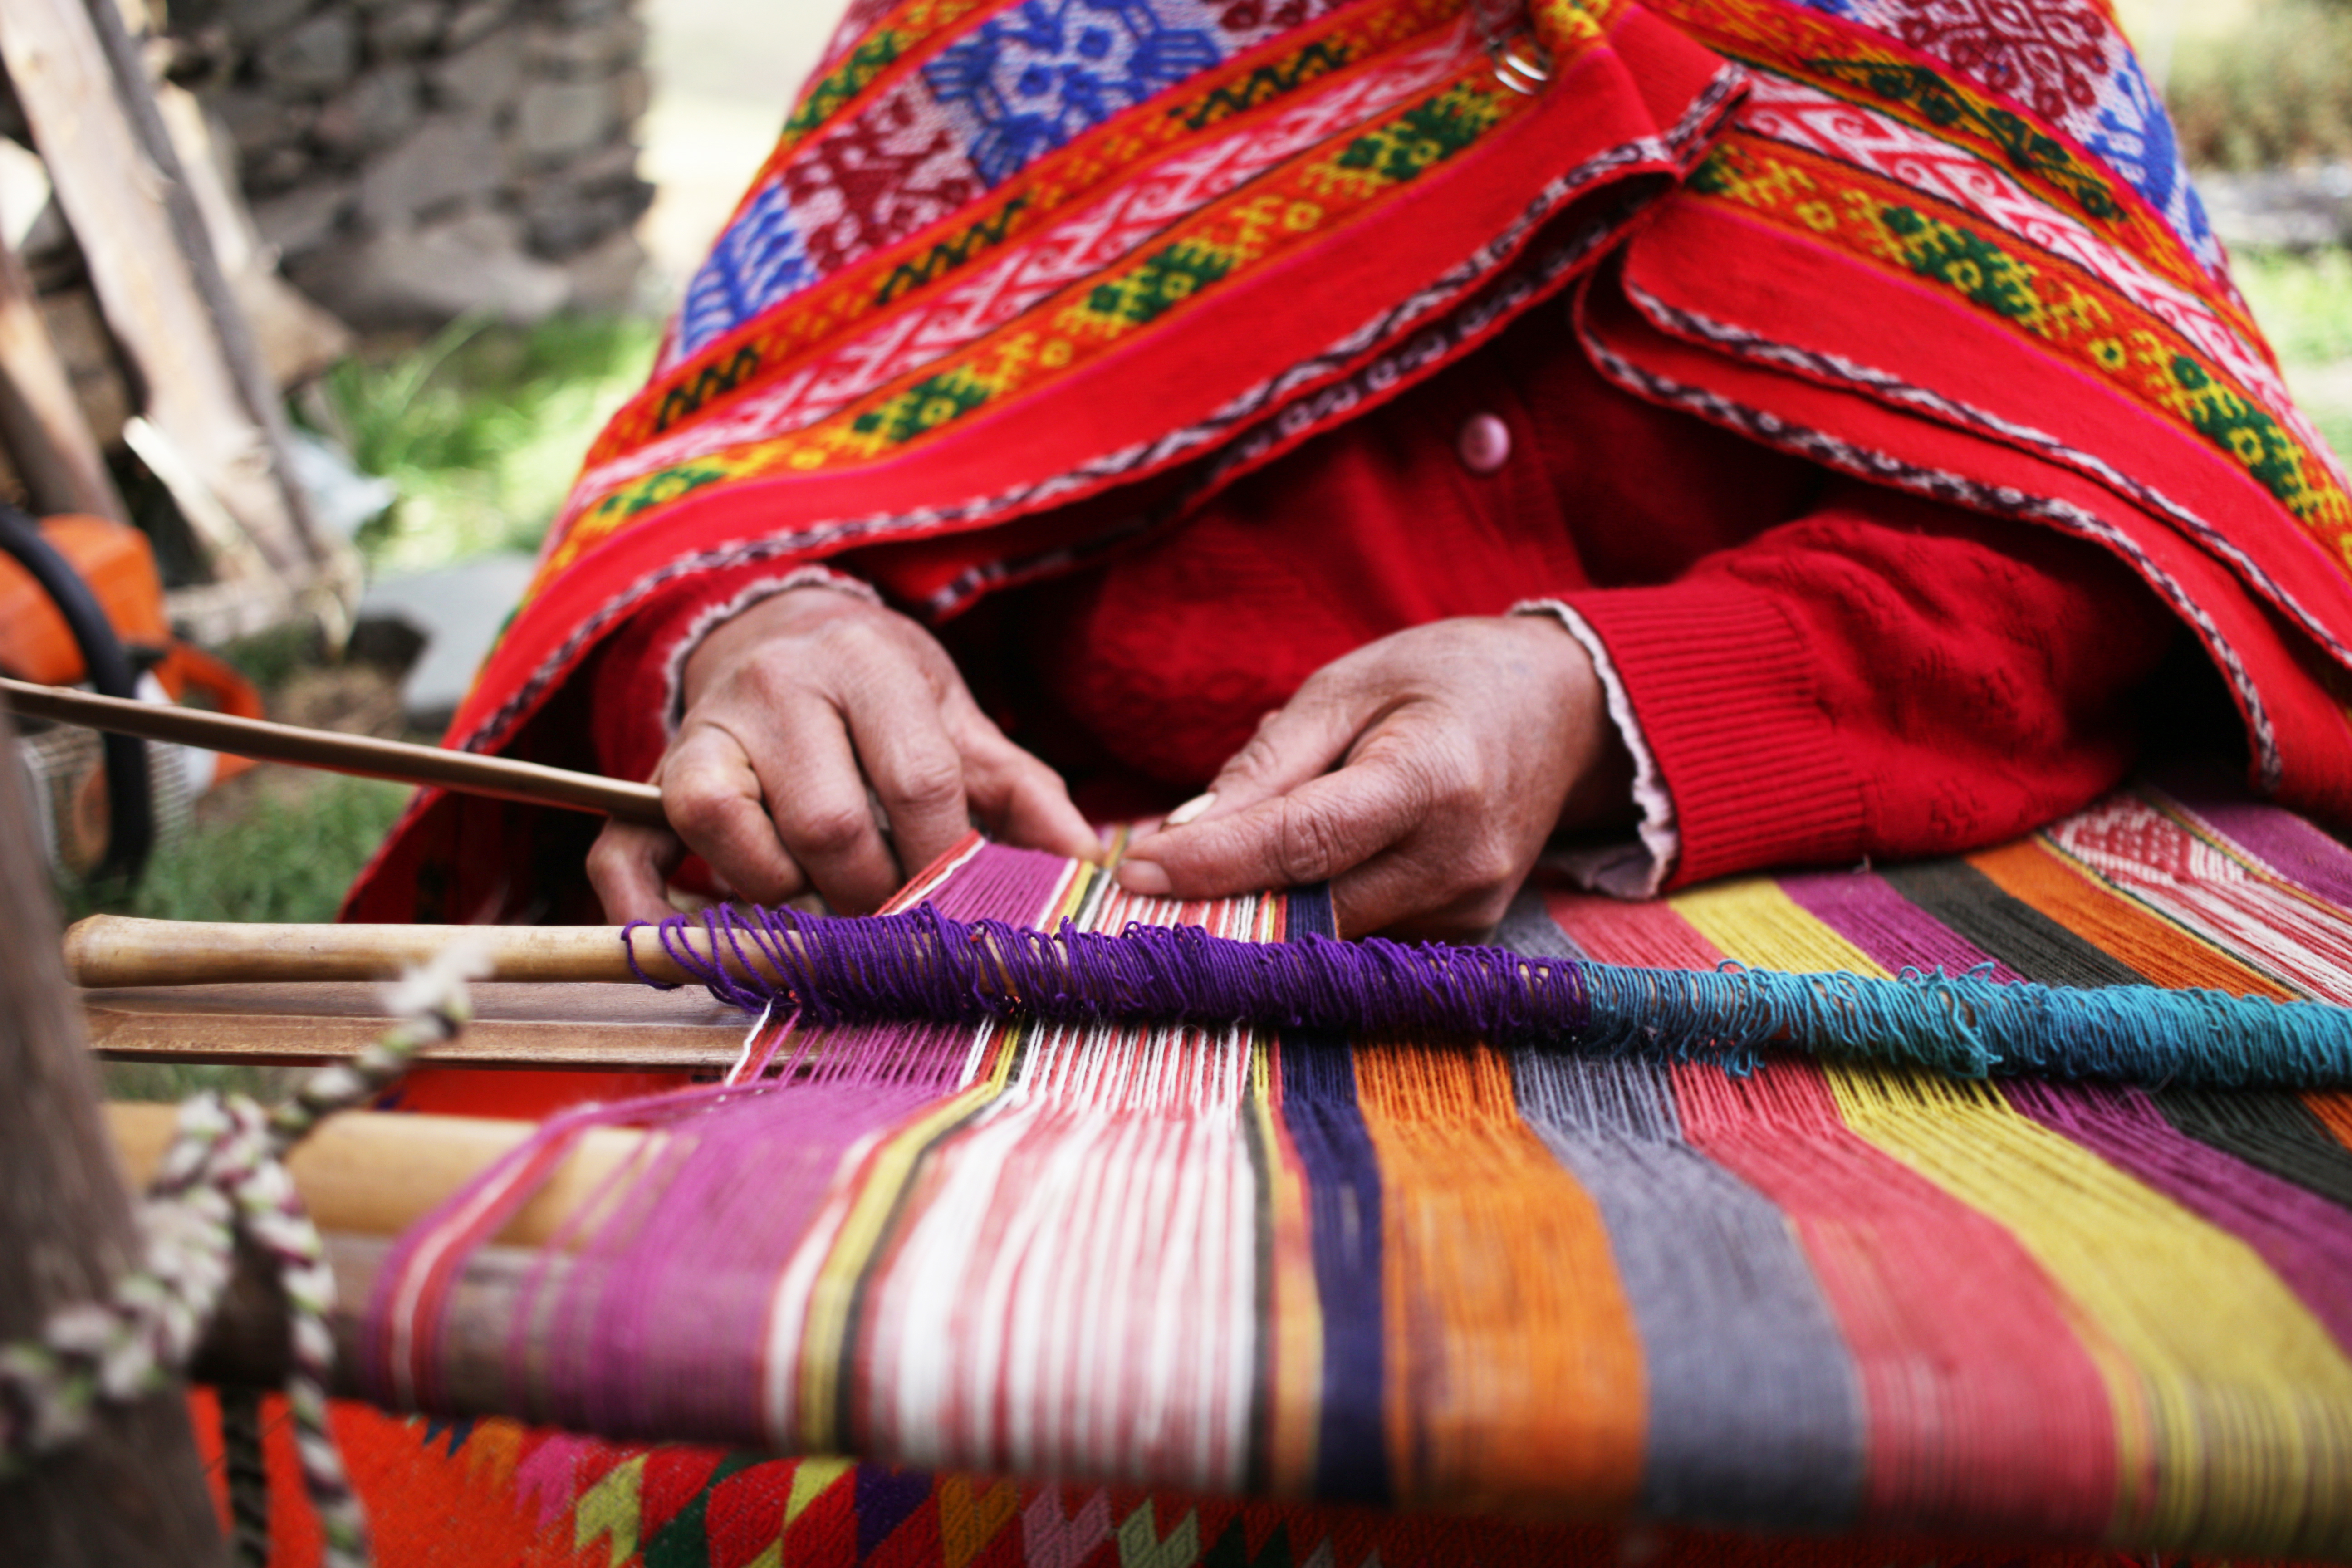 The Sacred Valley is rich in Peruvian culture